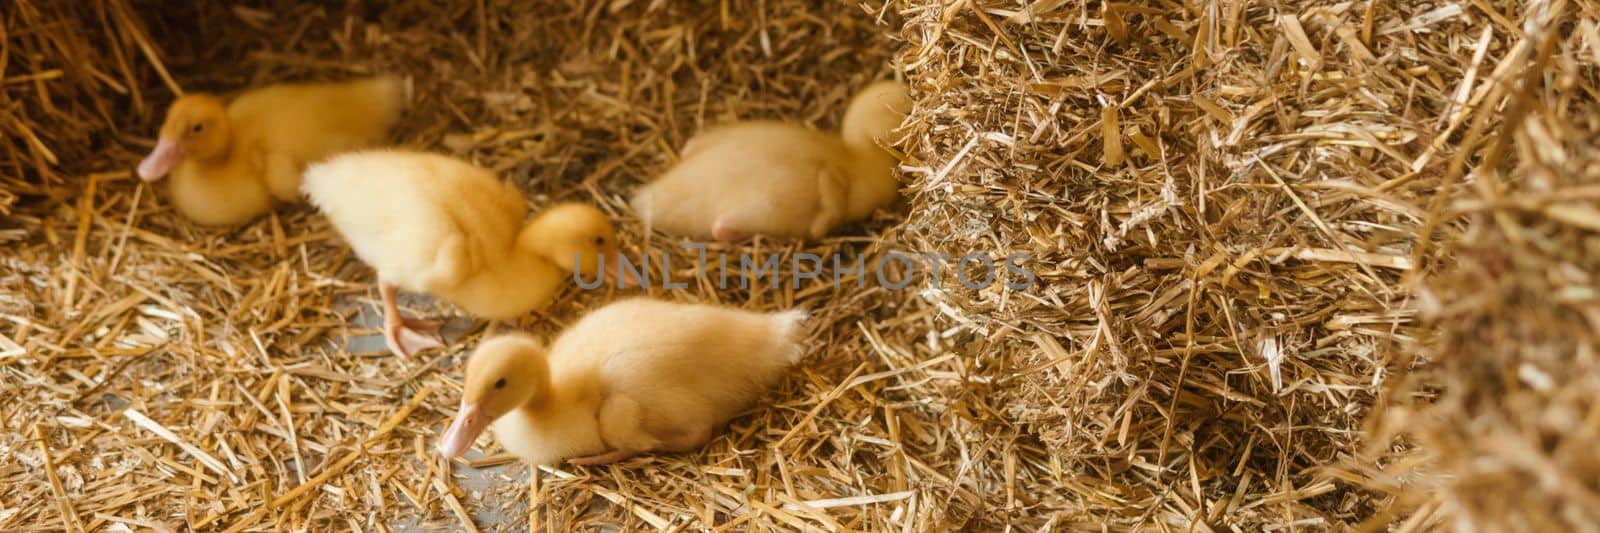 Live yellow ducks next to fresh hay close-up. the concept of raising animals on a farm. by Annu1tochka